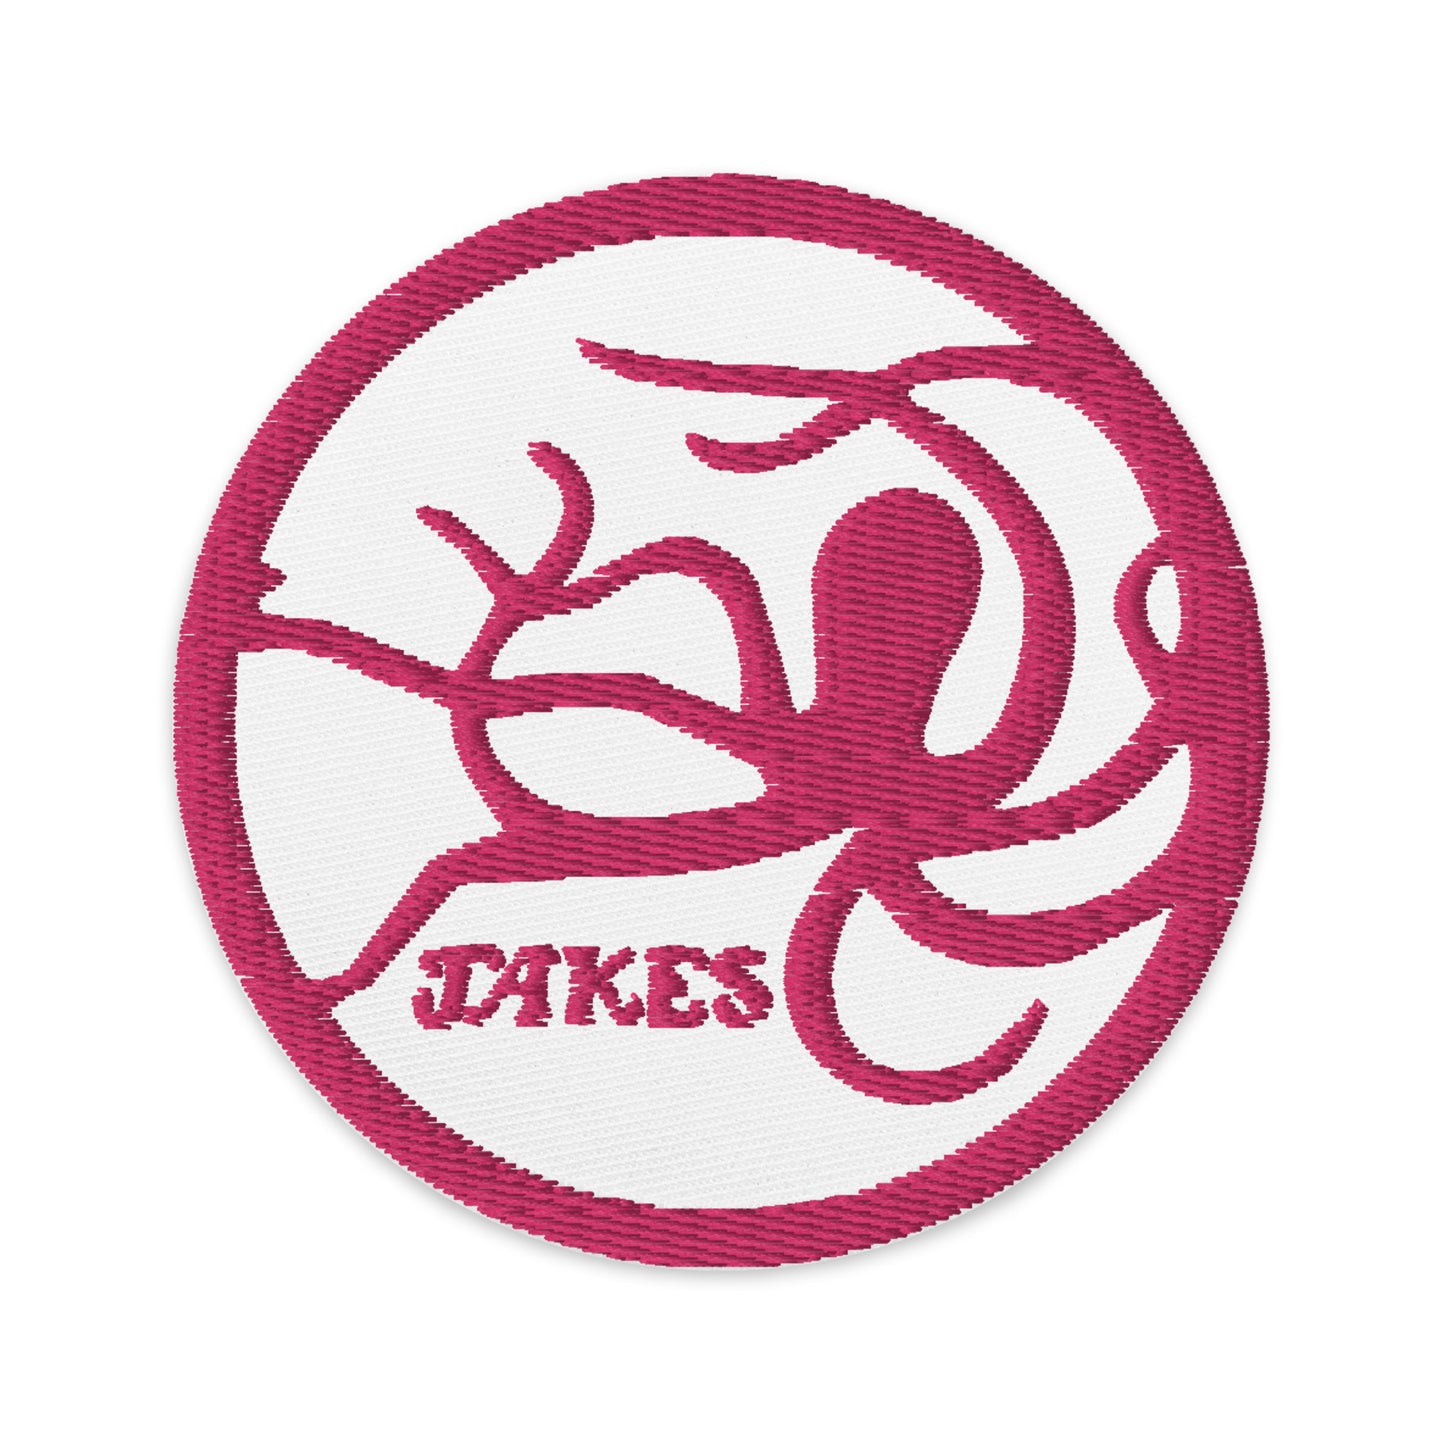 Jakes Octopus 3" Embroidered Pink Patch